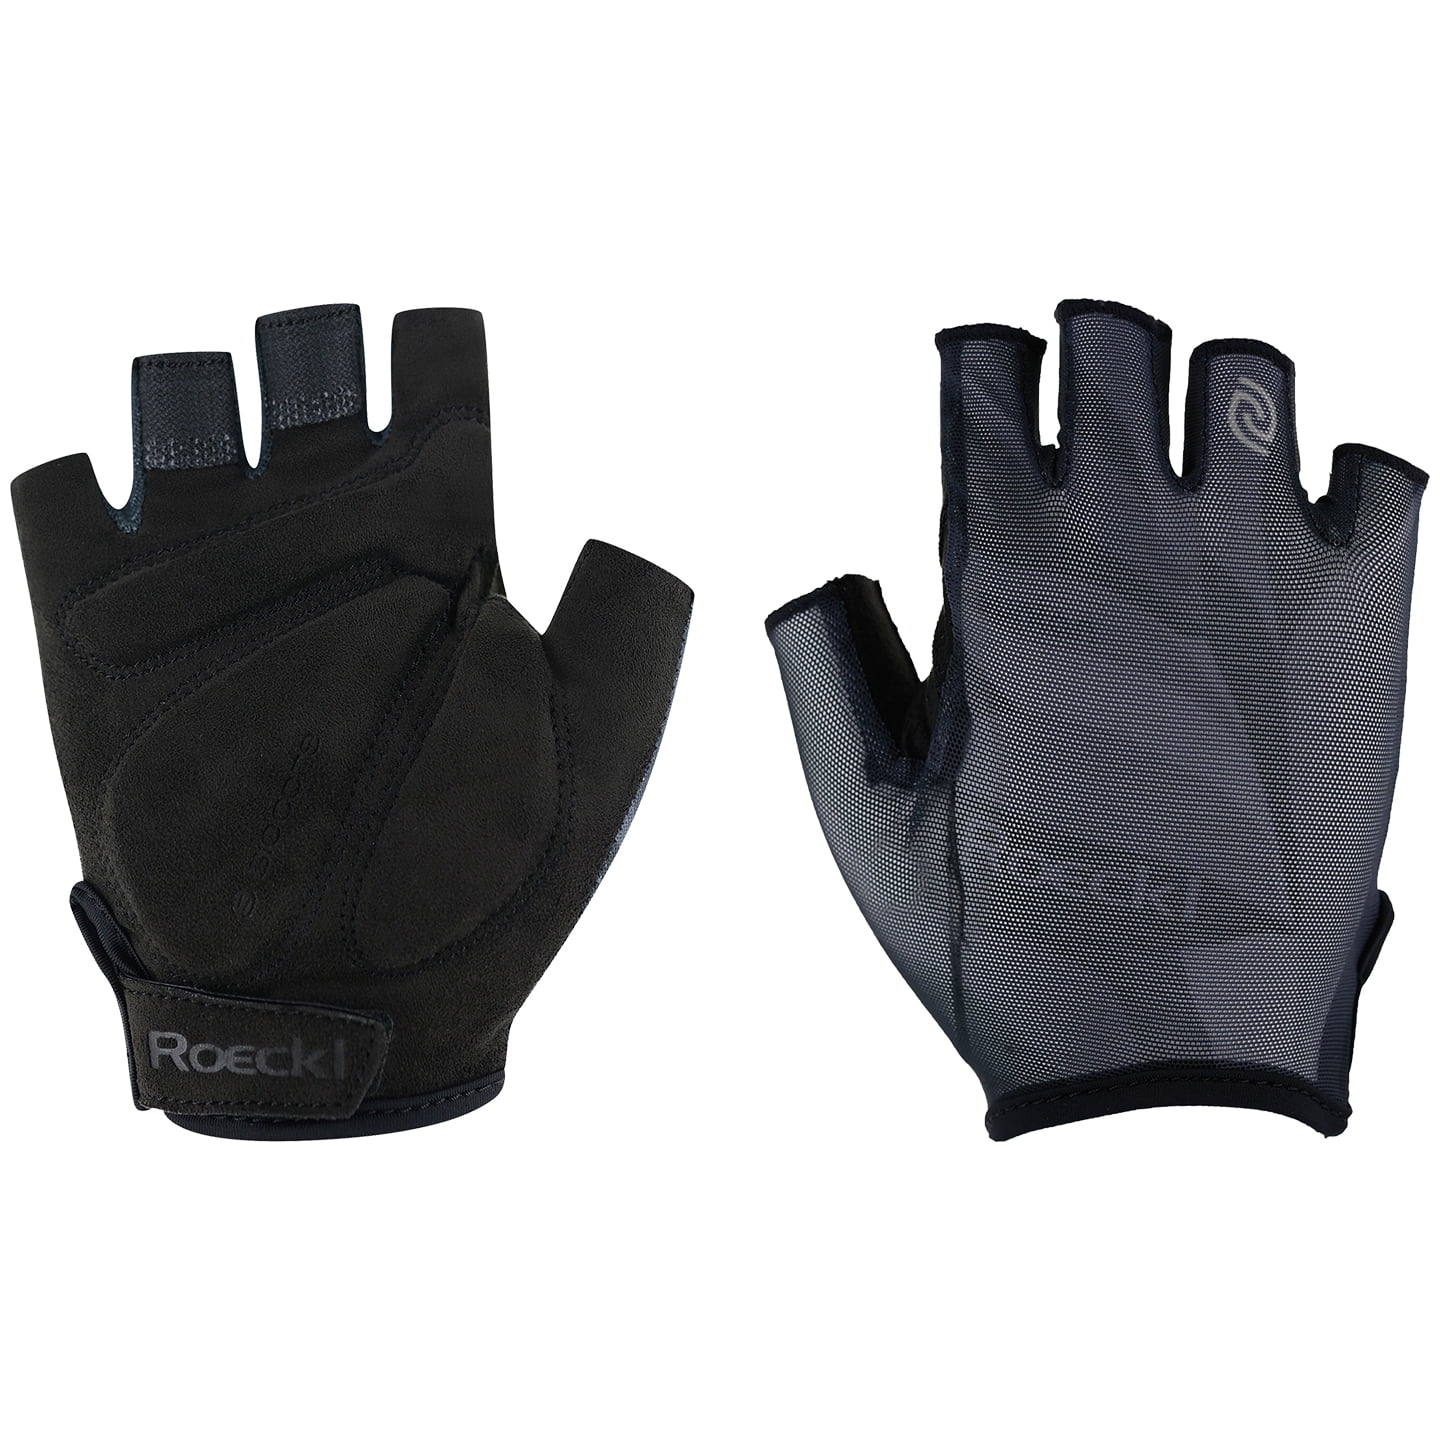 ROECKL Ibio Gloves, for men, size 8, Cycle gloves, Cycle clothes